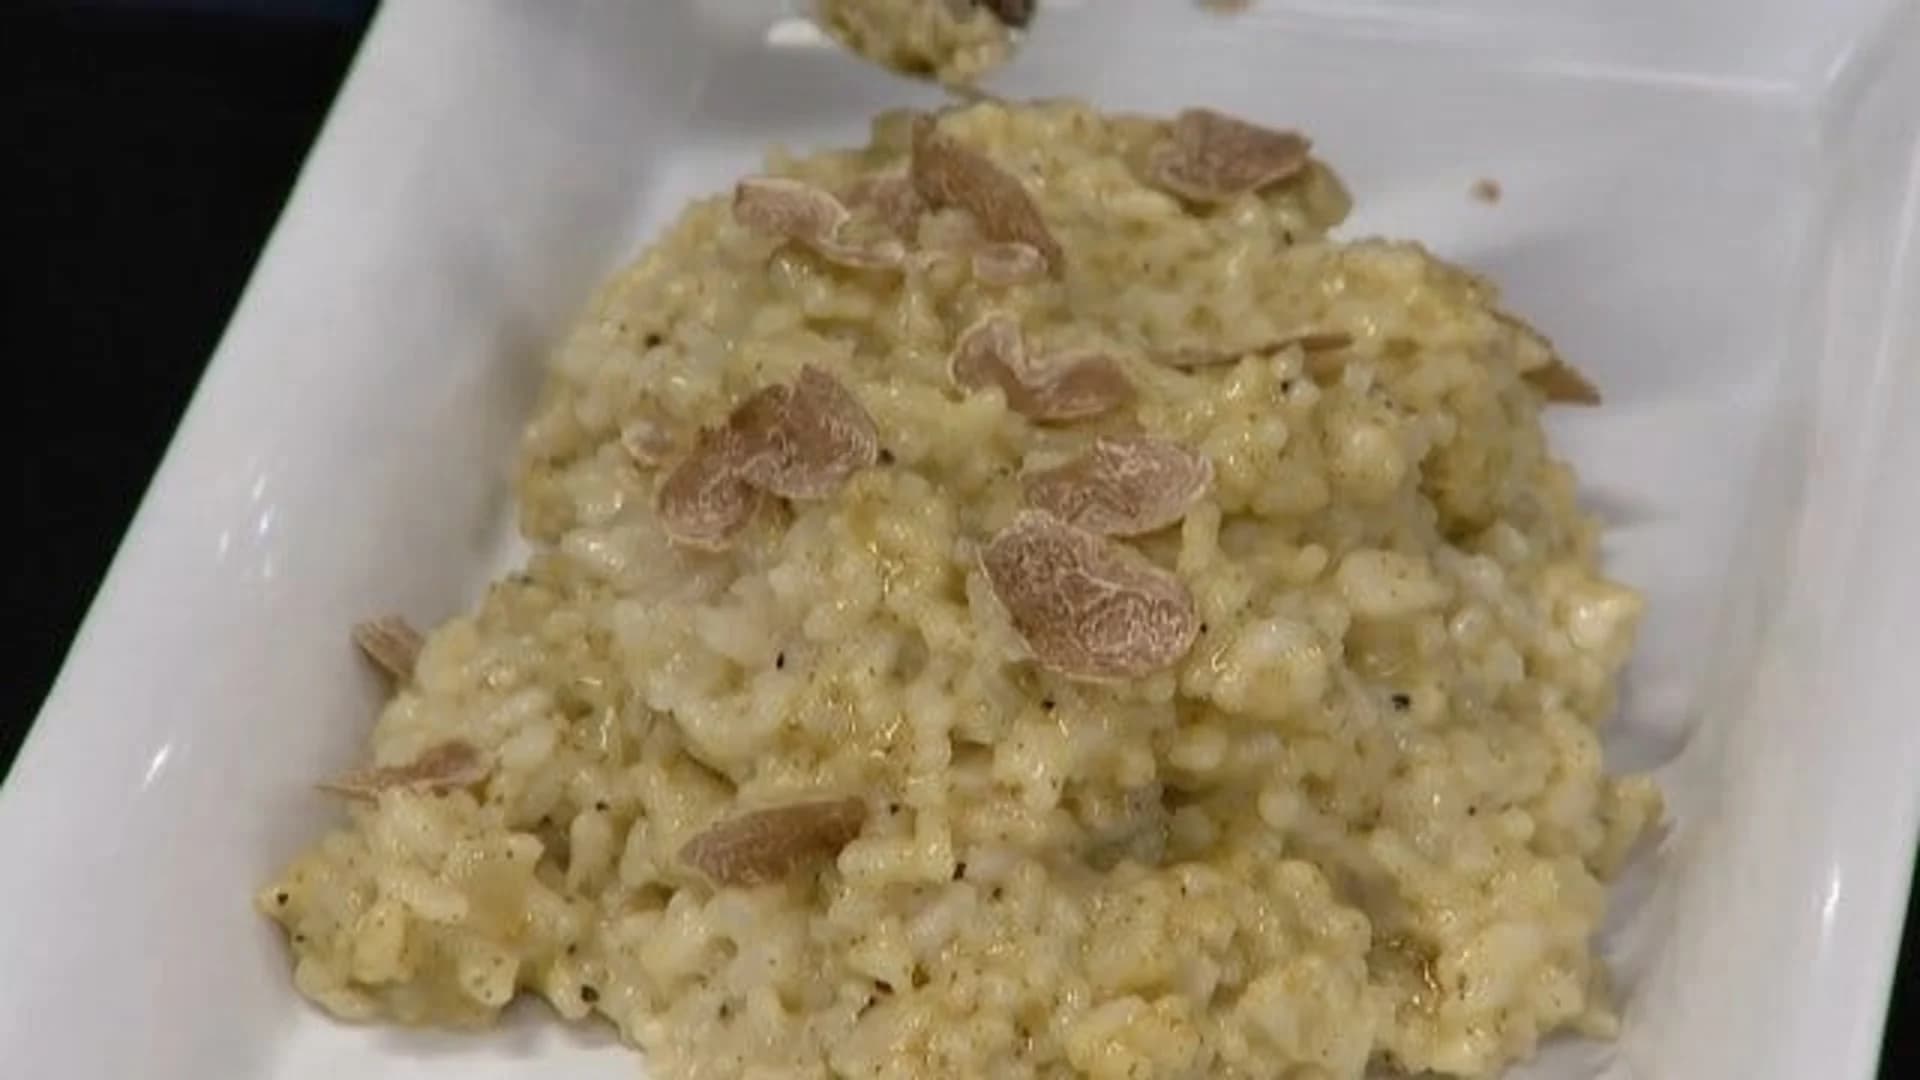 What's Cooking: Truffle risotto